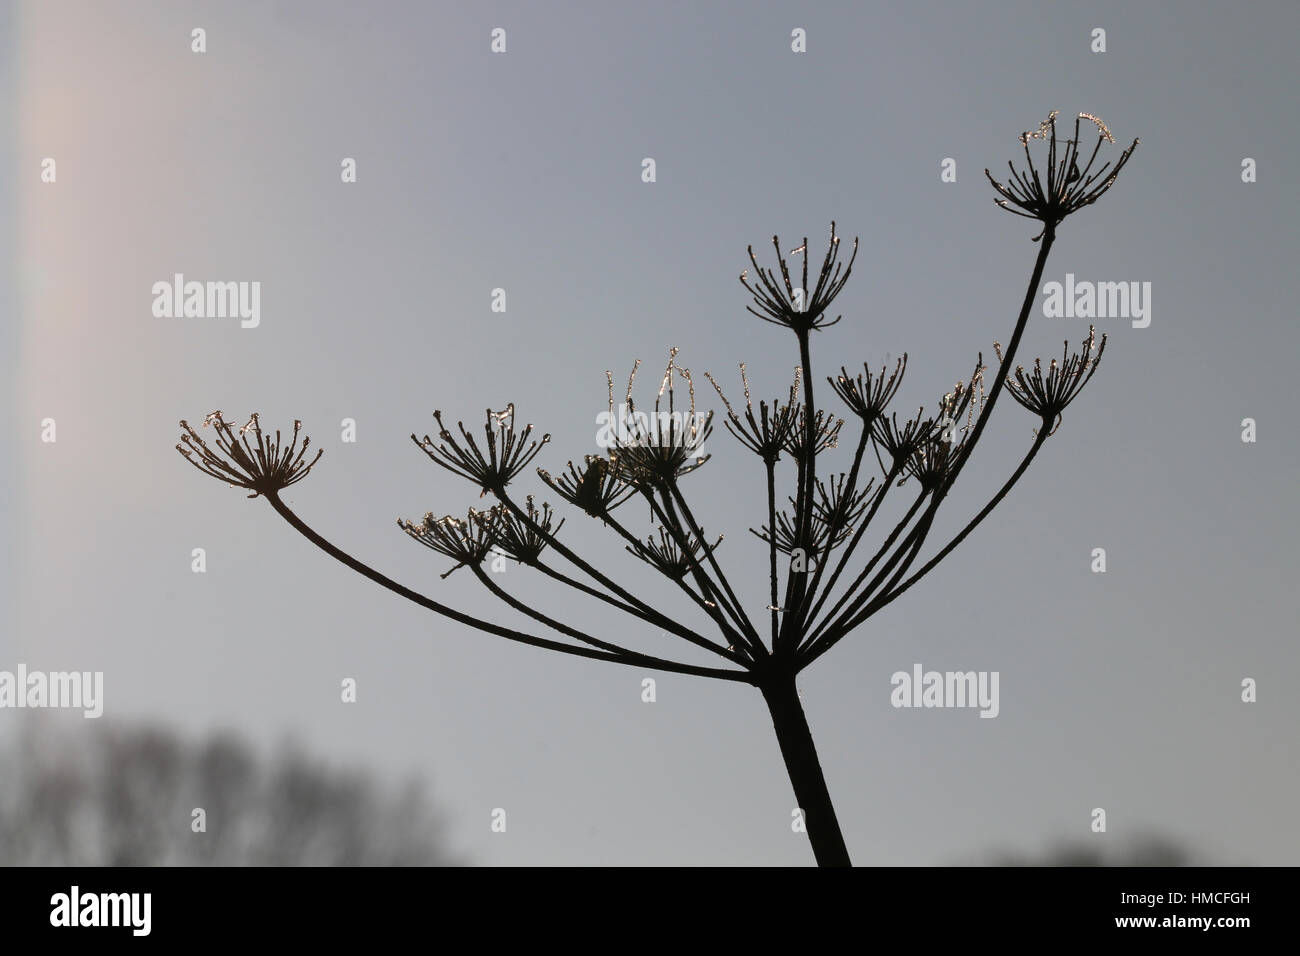 dried stalks of umbellifer plant coated with frost against a grey/blue sky Stock Photo